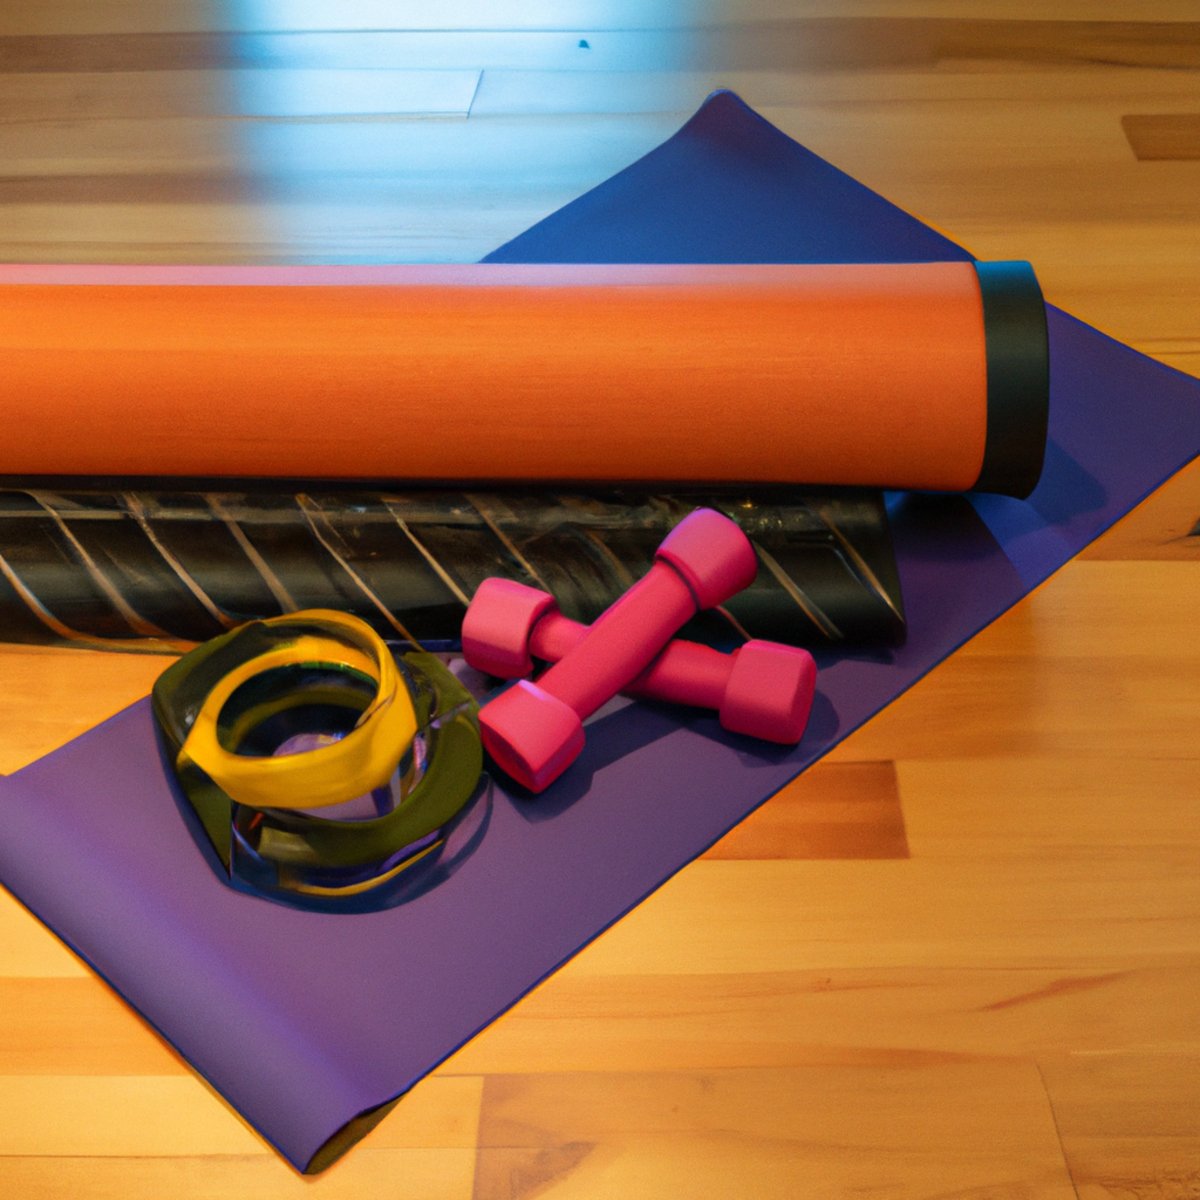 The photo features a set of dumbbells, a resistance band, a yoga mat, and a foam roller arranged neatly on a wooden floor, specifically designed for senior exercises and fitness. The dumbbells are of varying weights and are placed on either side of the resistance band, which is coiled up and placed in the center. The yoga mat is rolled up and placed next to the dumbbells, while the foam roller is placed at the end of the mat. The lighting in the photo is bright and natural, highlighting the texture and details of each object. The composition of the photo suggests a sense of order and purpose, inviting the viewer to imagine themselves using these tools to build stronger bones and improve their overall fitness, especially in a senior context.